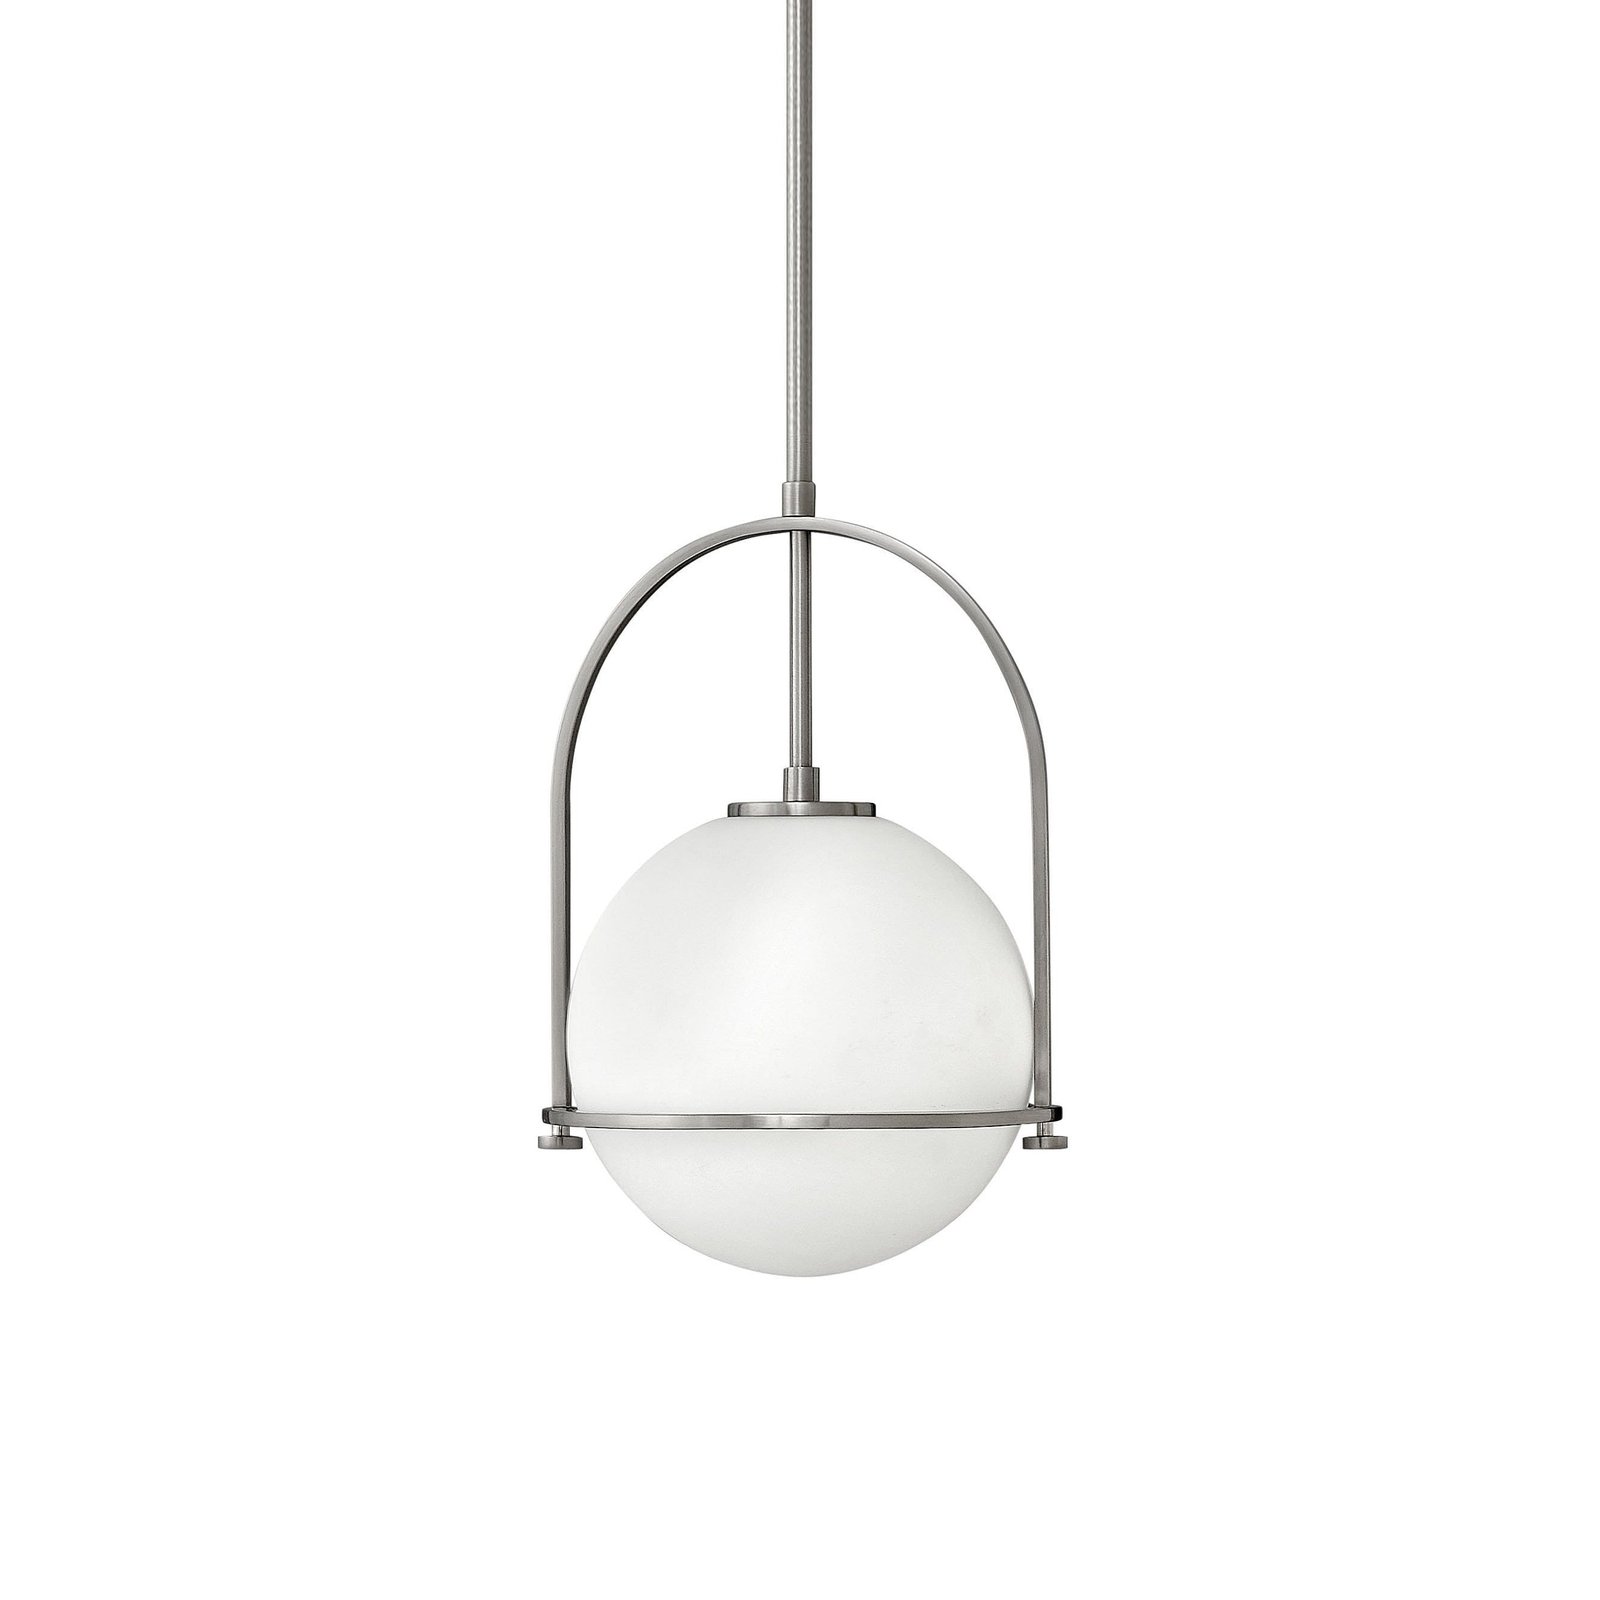 Silver Somerset Pendant Light, measuring 11.4 inches in diameter and 11.8 inches in height (29cm x 30cm).